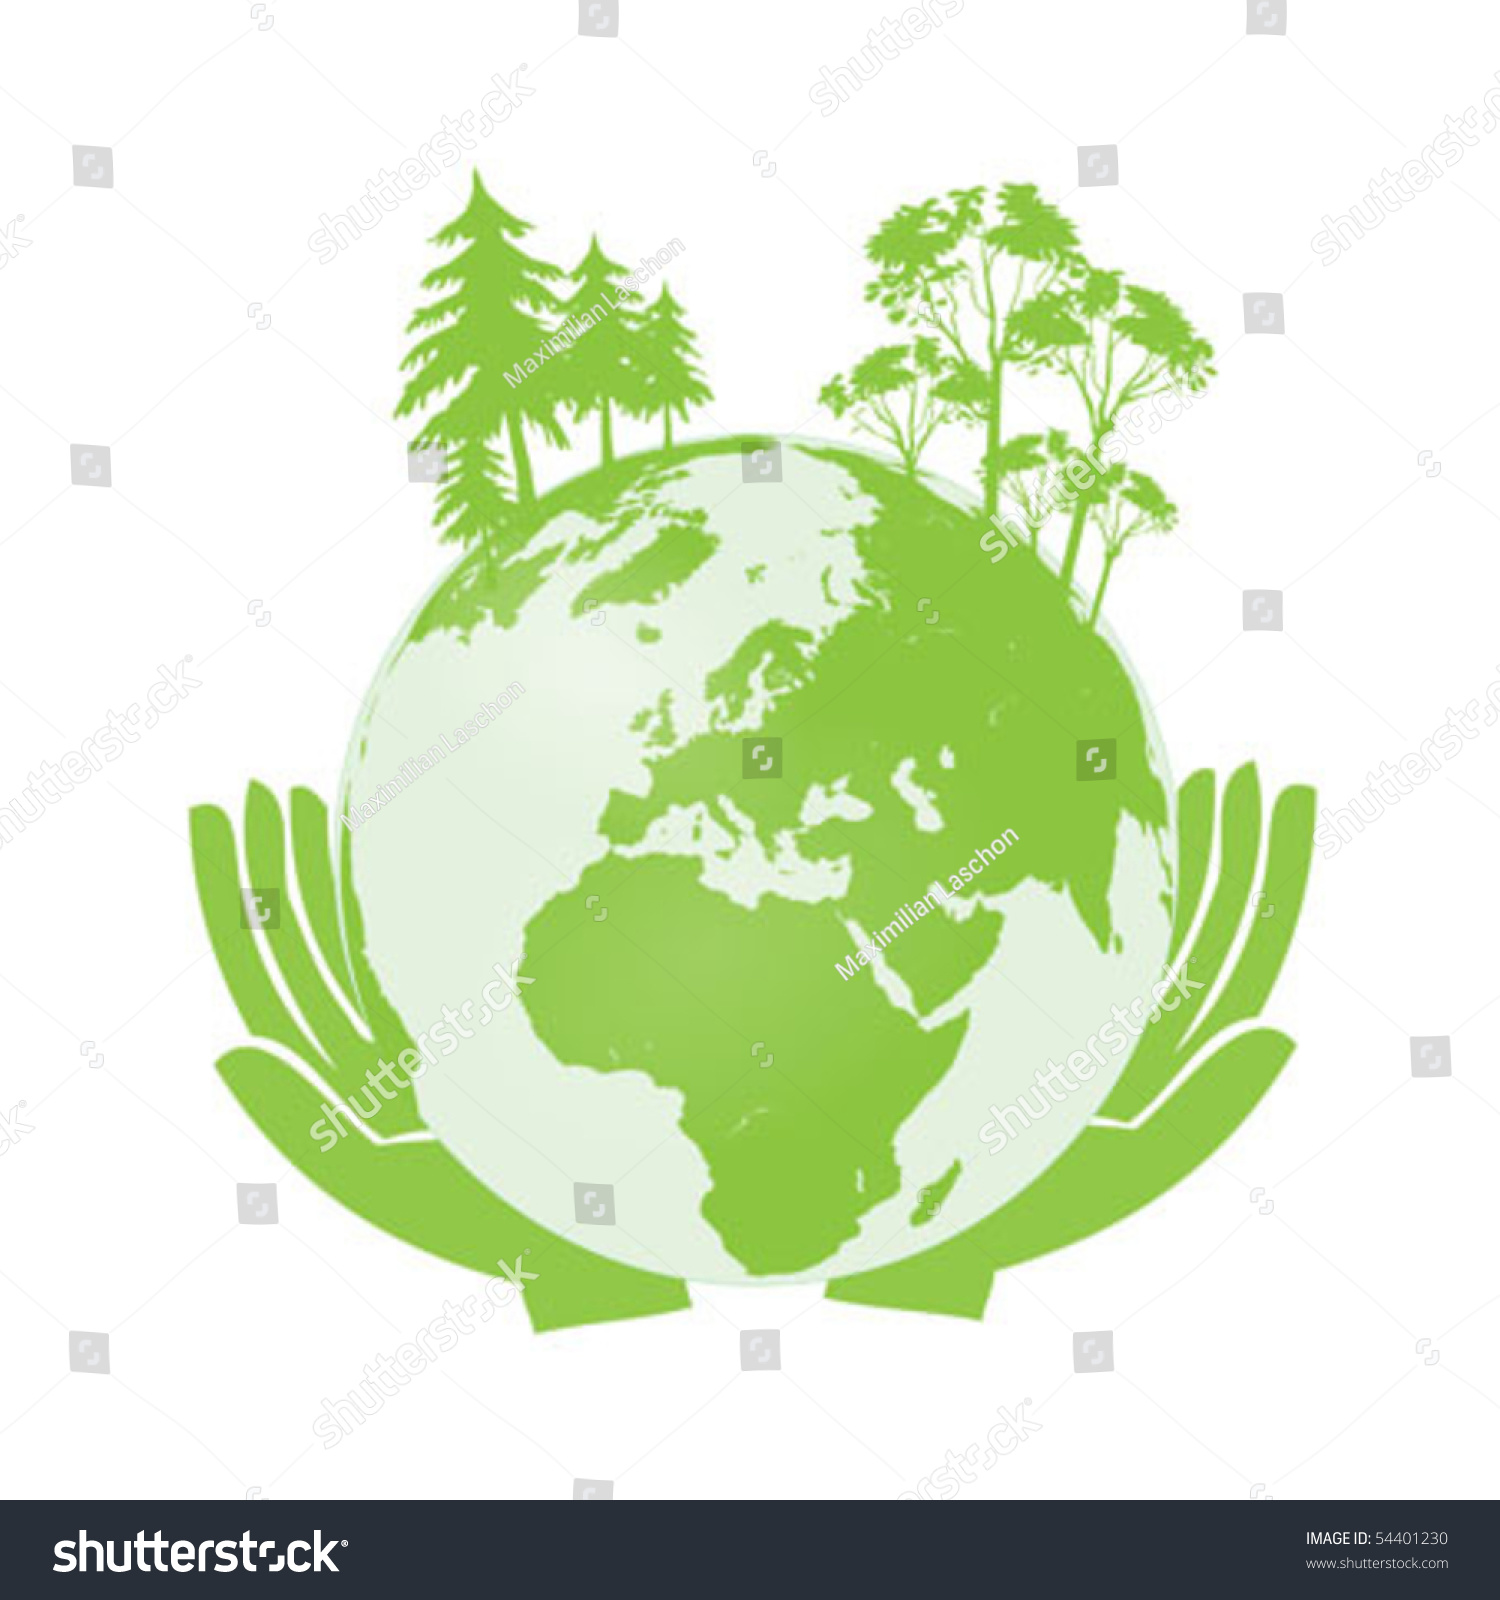 mother earth clip art free - photo #36